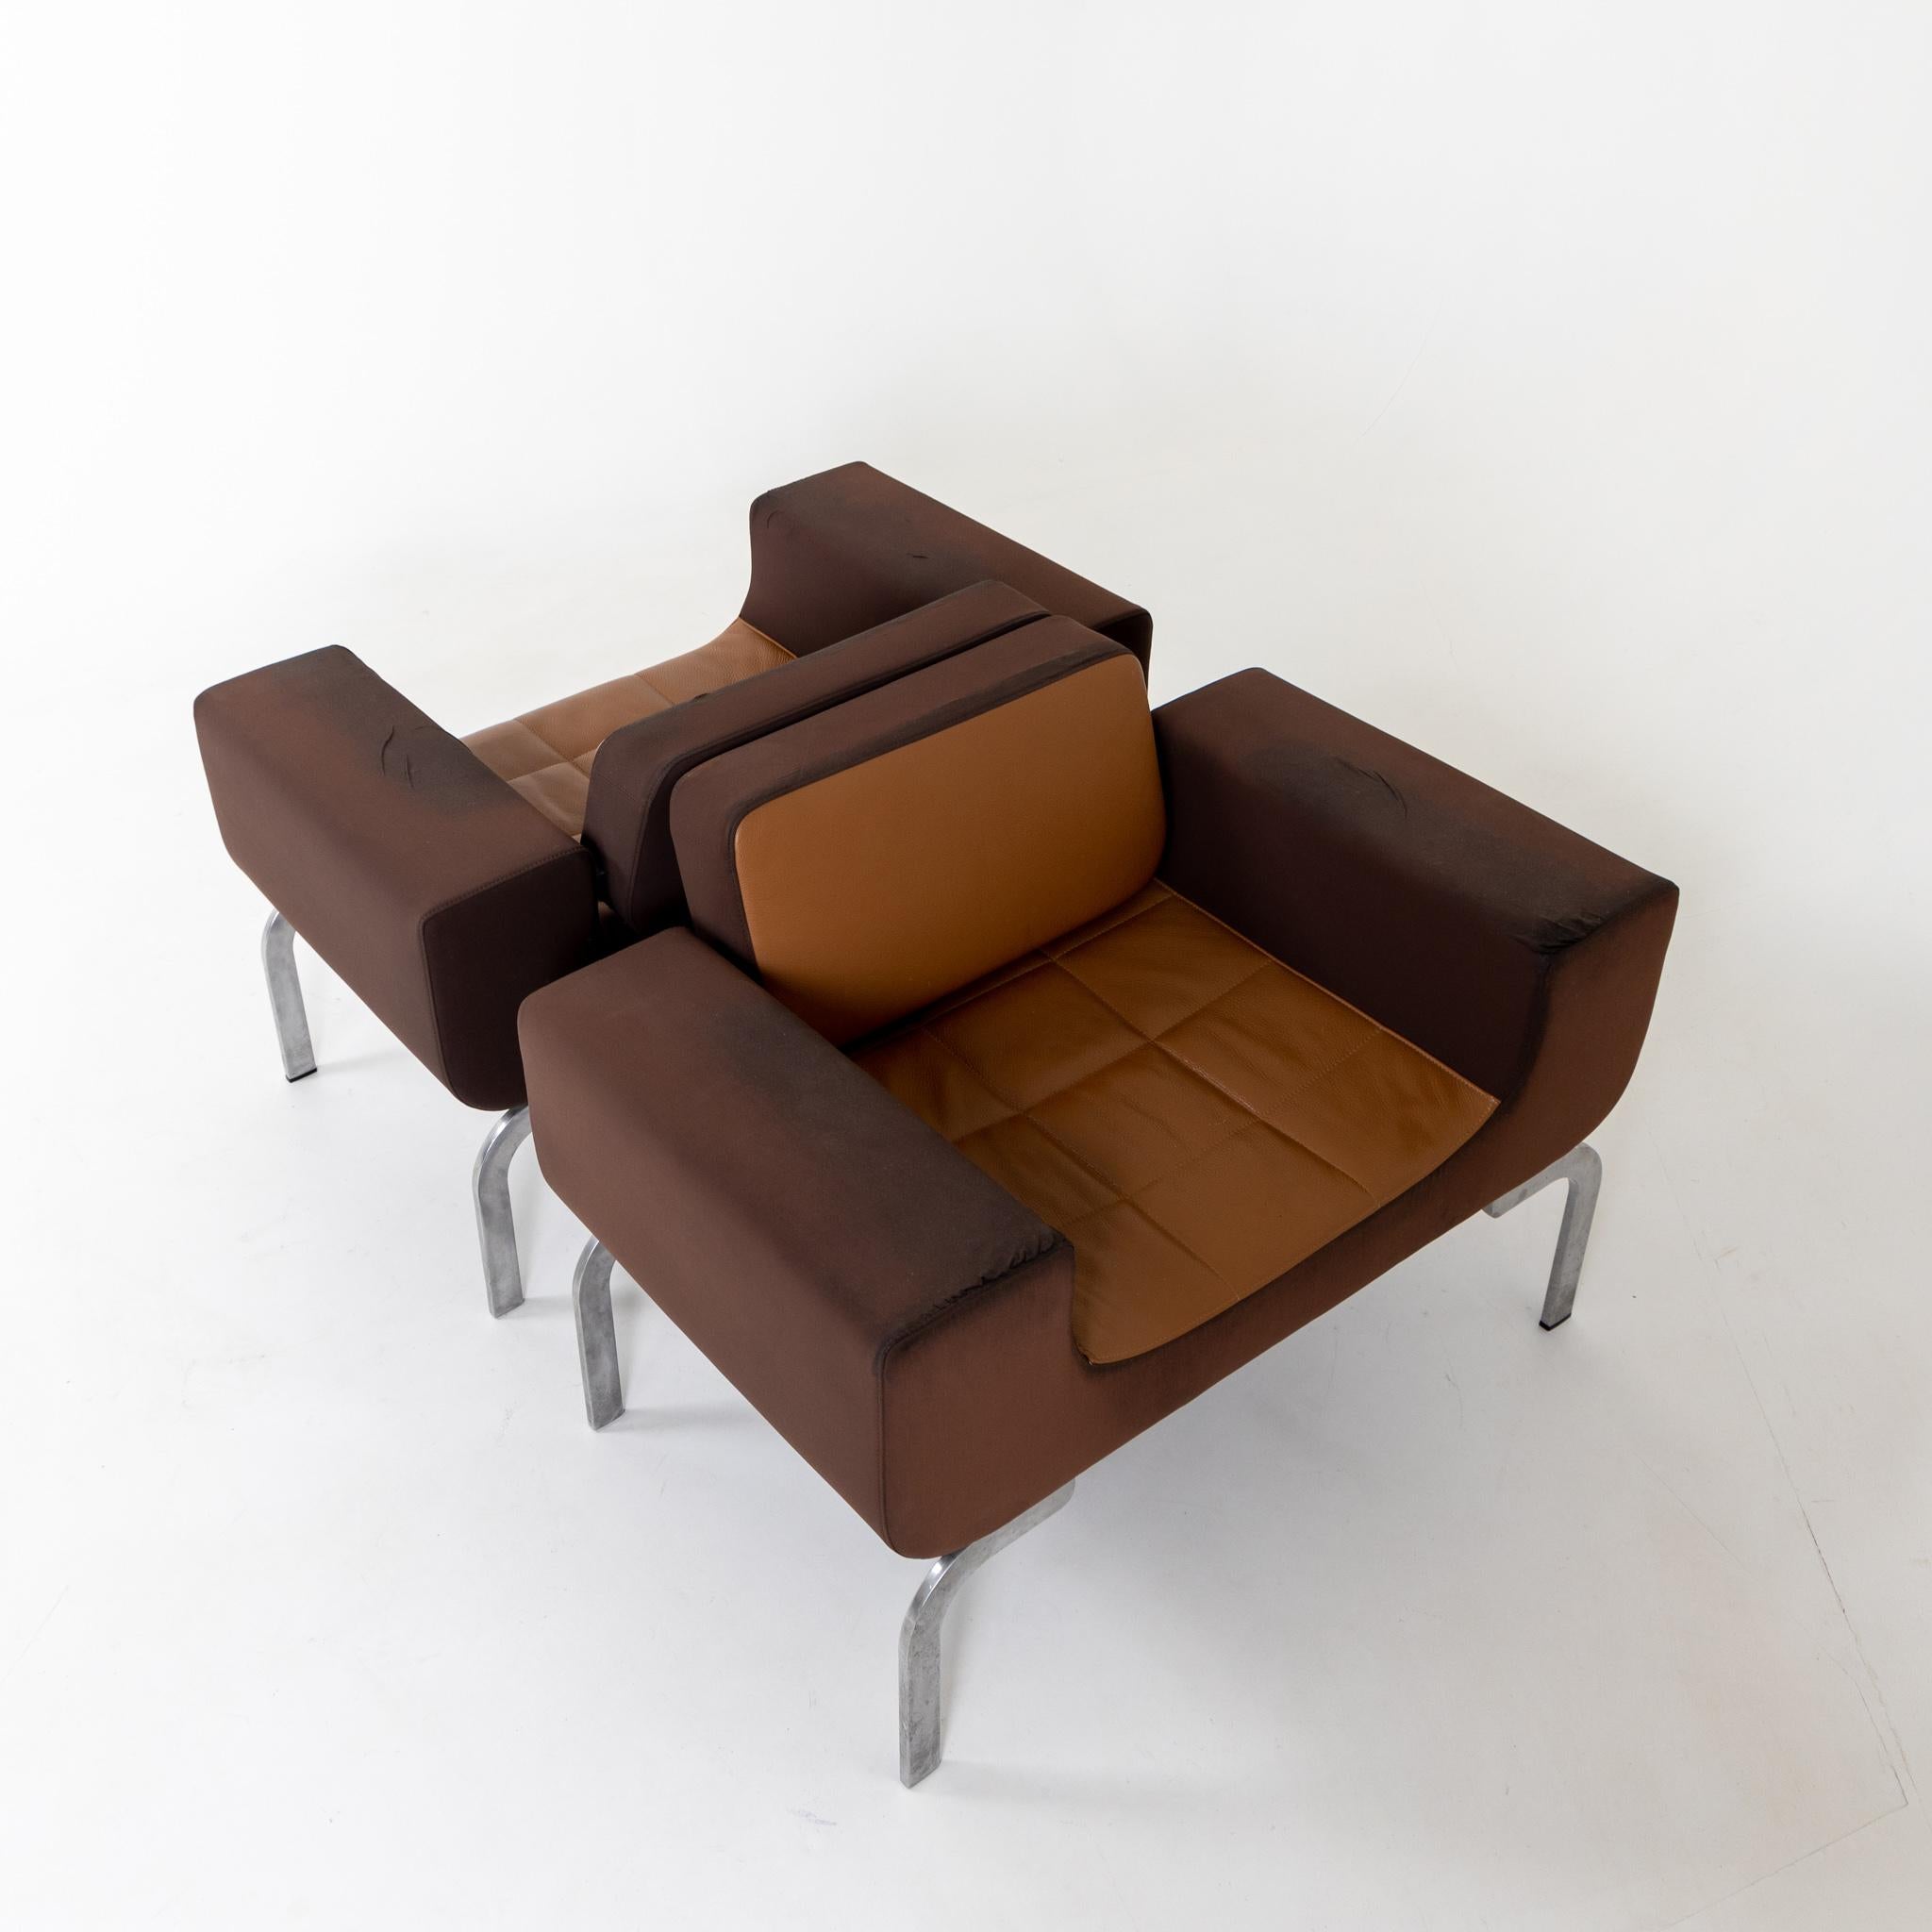 Pair of Brown Lounge Chairs, Fabric and Metal, Italy 1970s For Sale 1